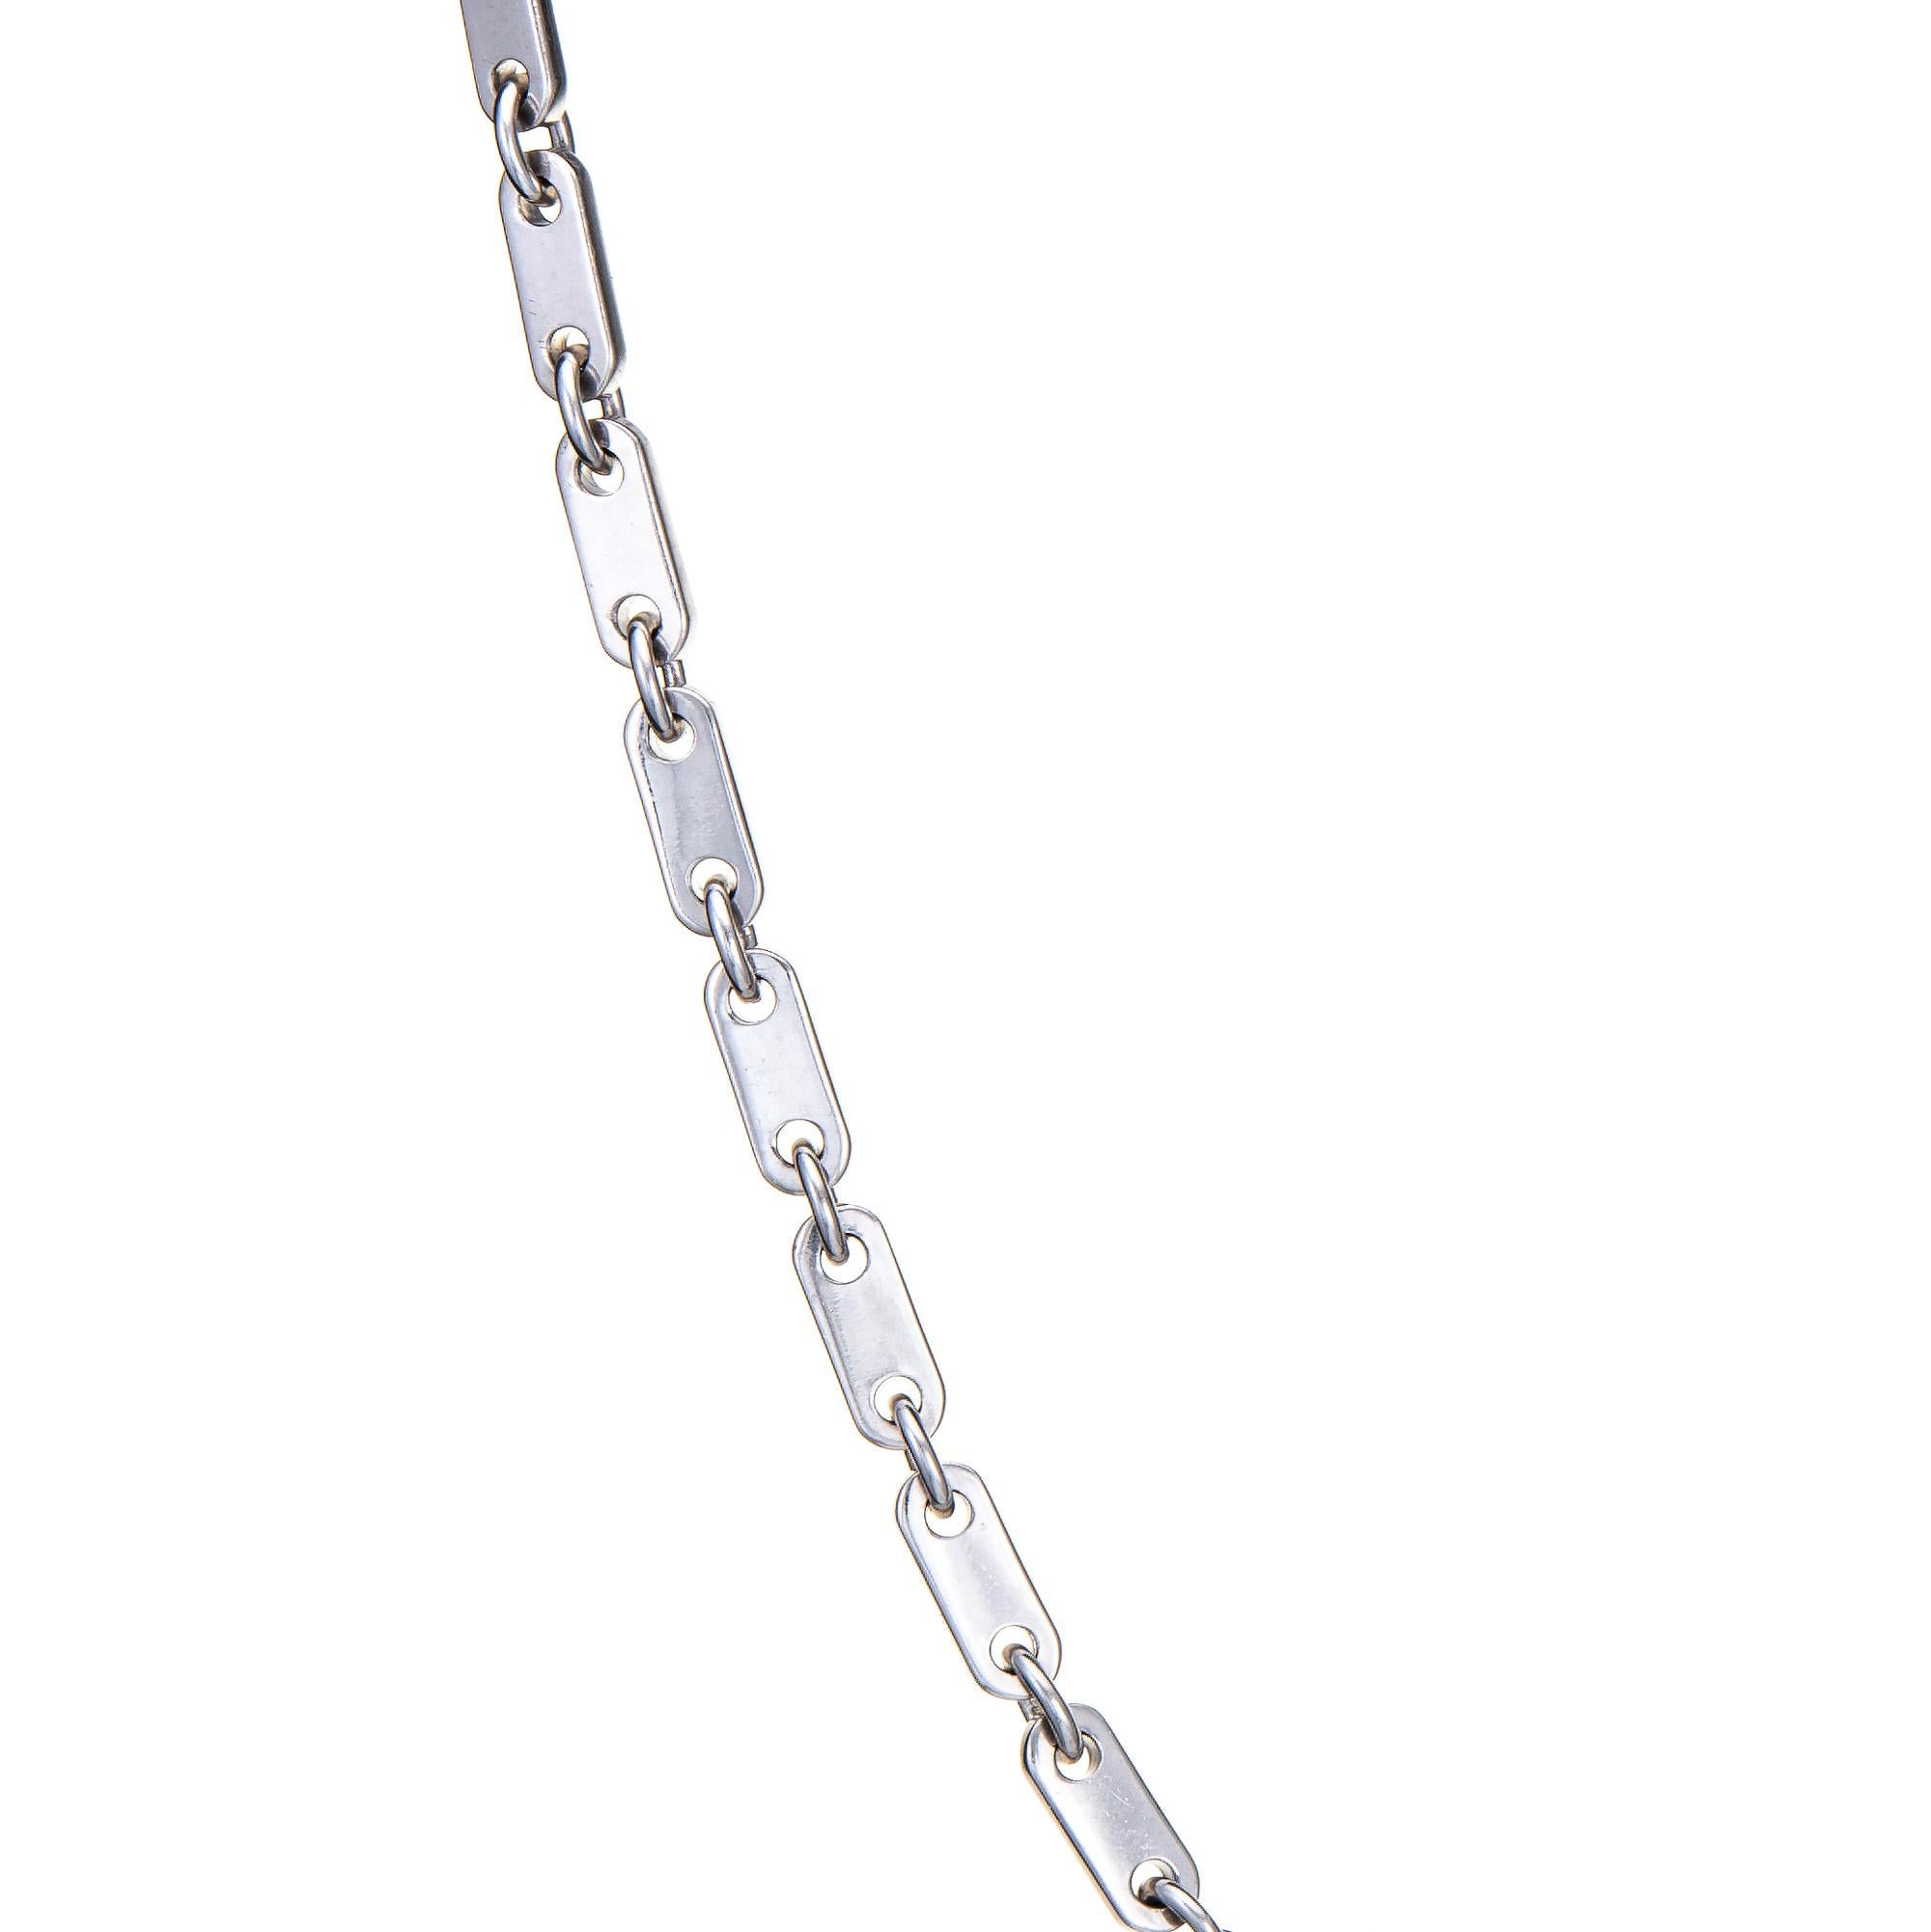 Vintage Cartier Fidelity bar link necklace crafted in 18 karat white gold.  

The flat link necklace is a Cartier classic, circa 1990s. Great worn alone or layered with your fine necklaces from any era. 

The necklace is in very good original